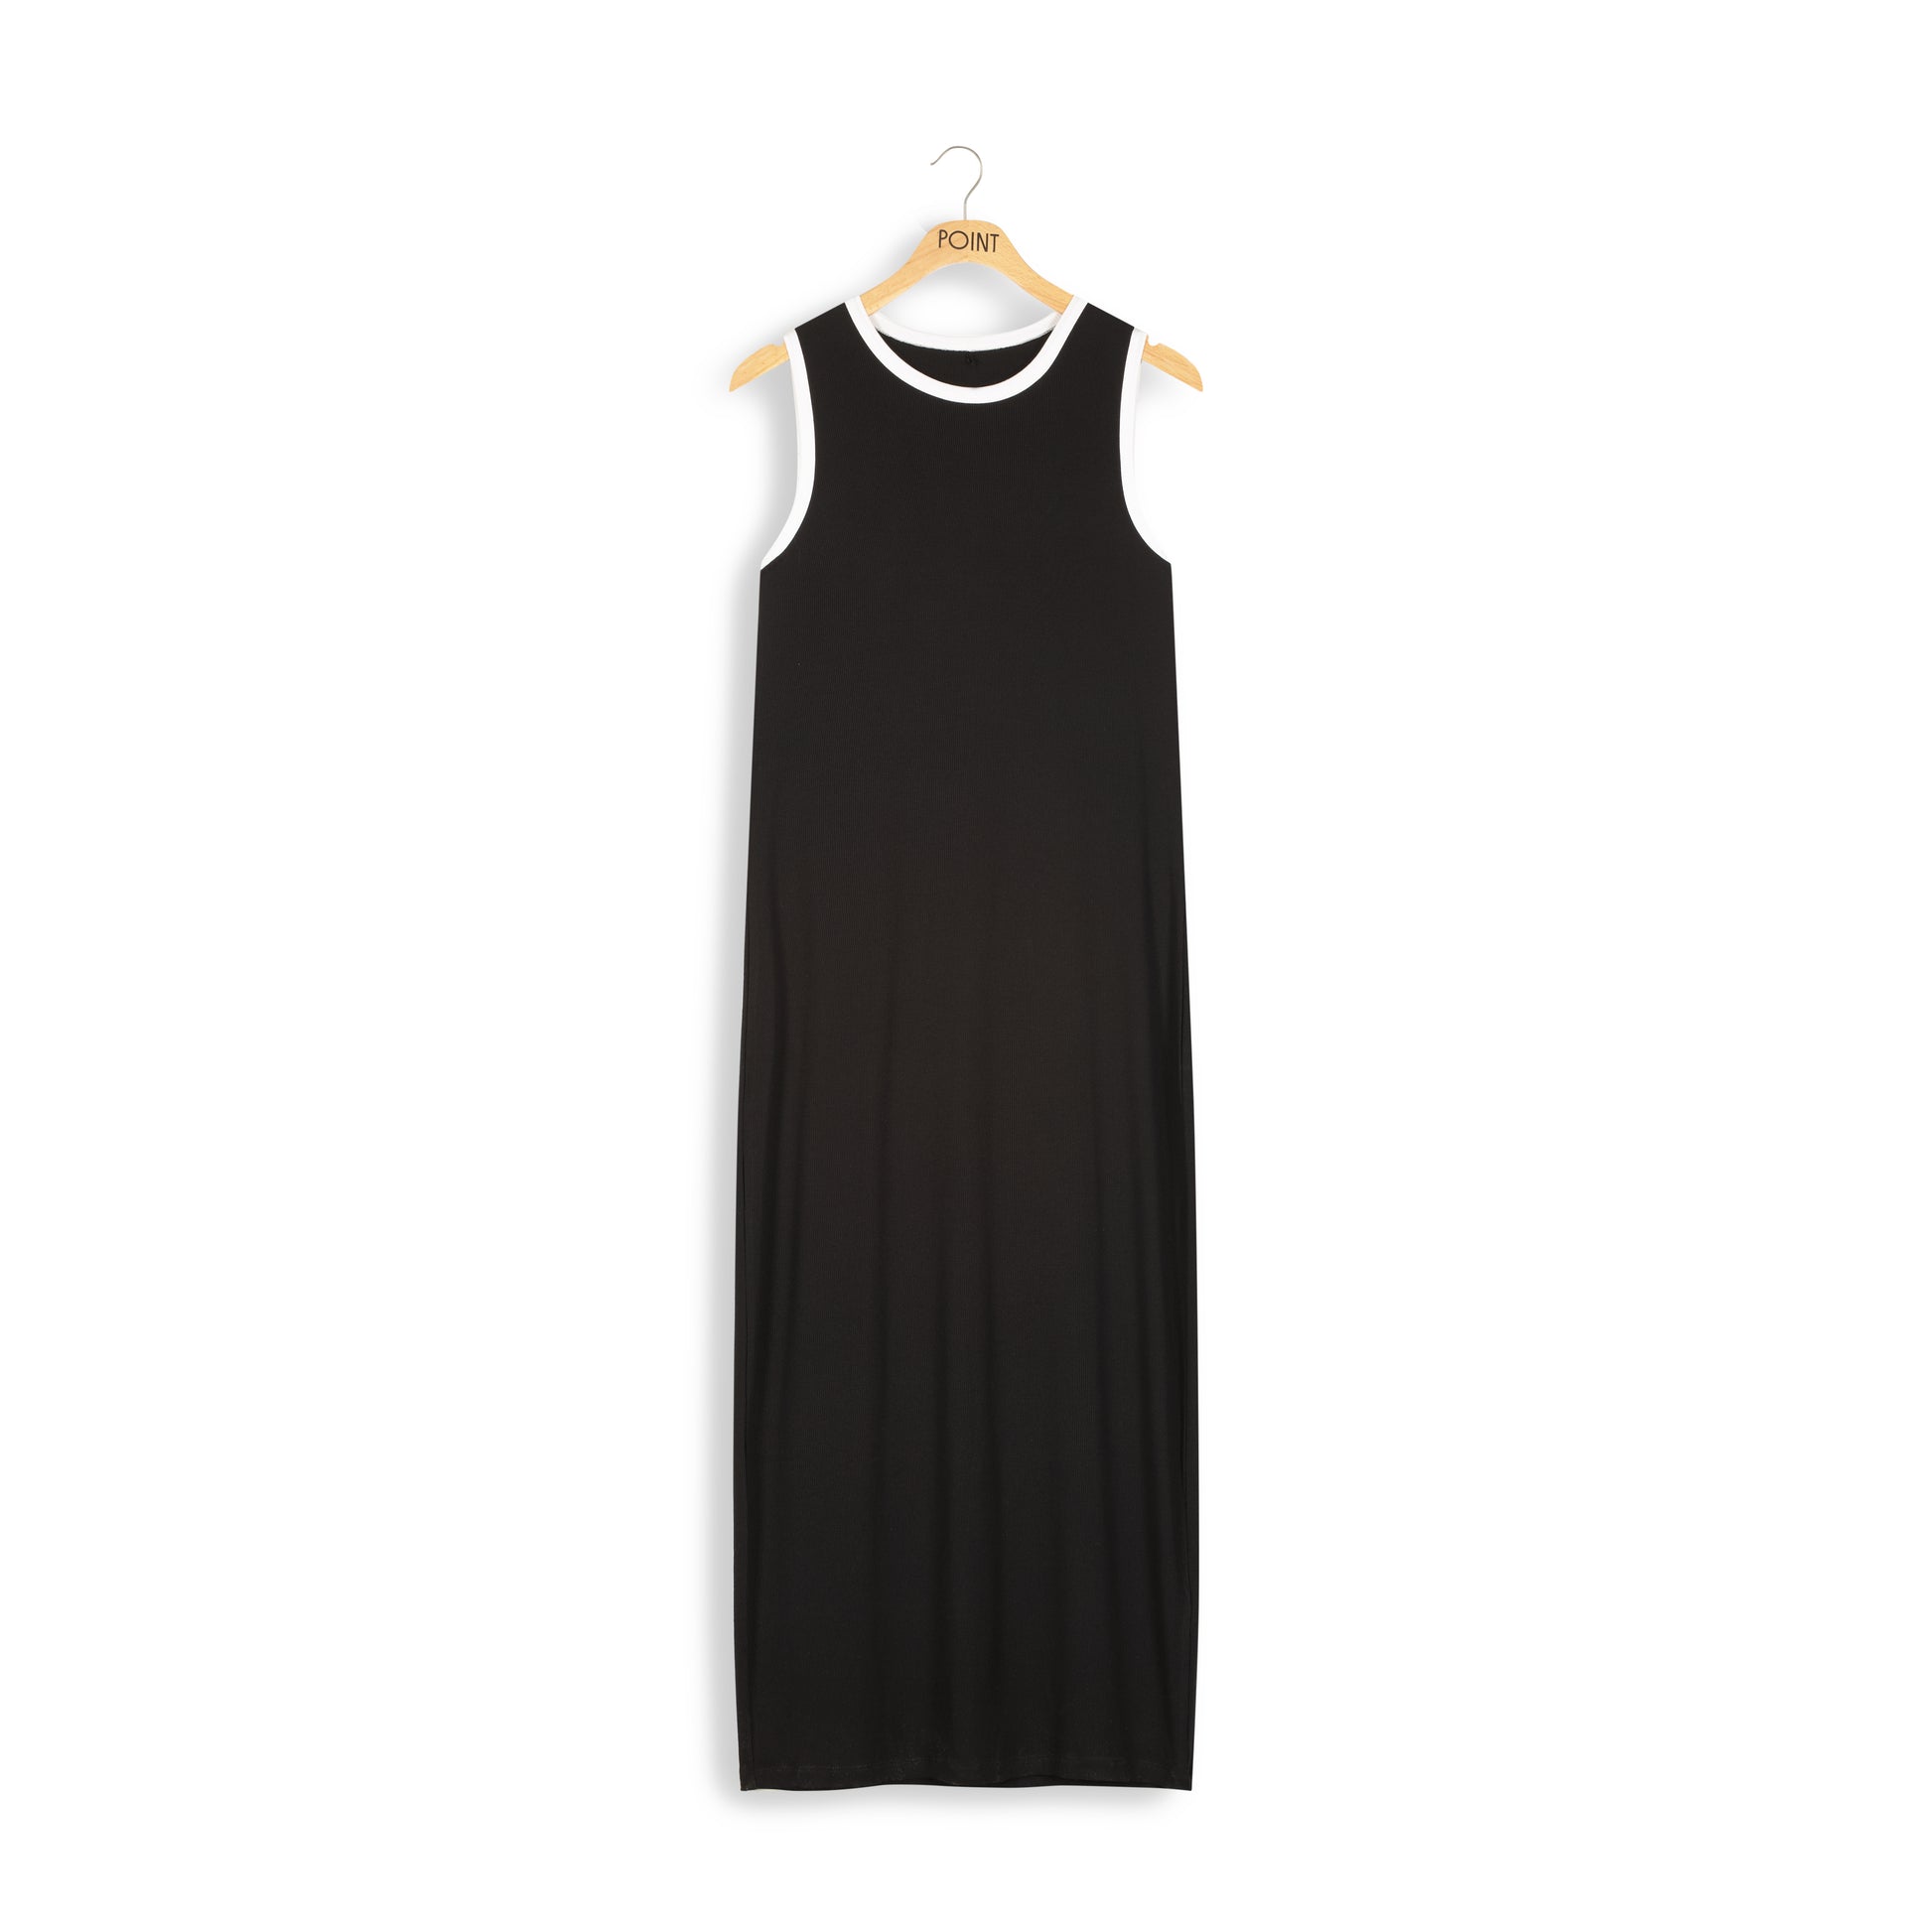 Point tennis ribbed dress